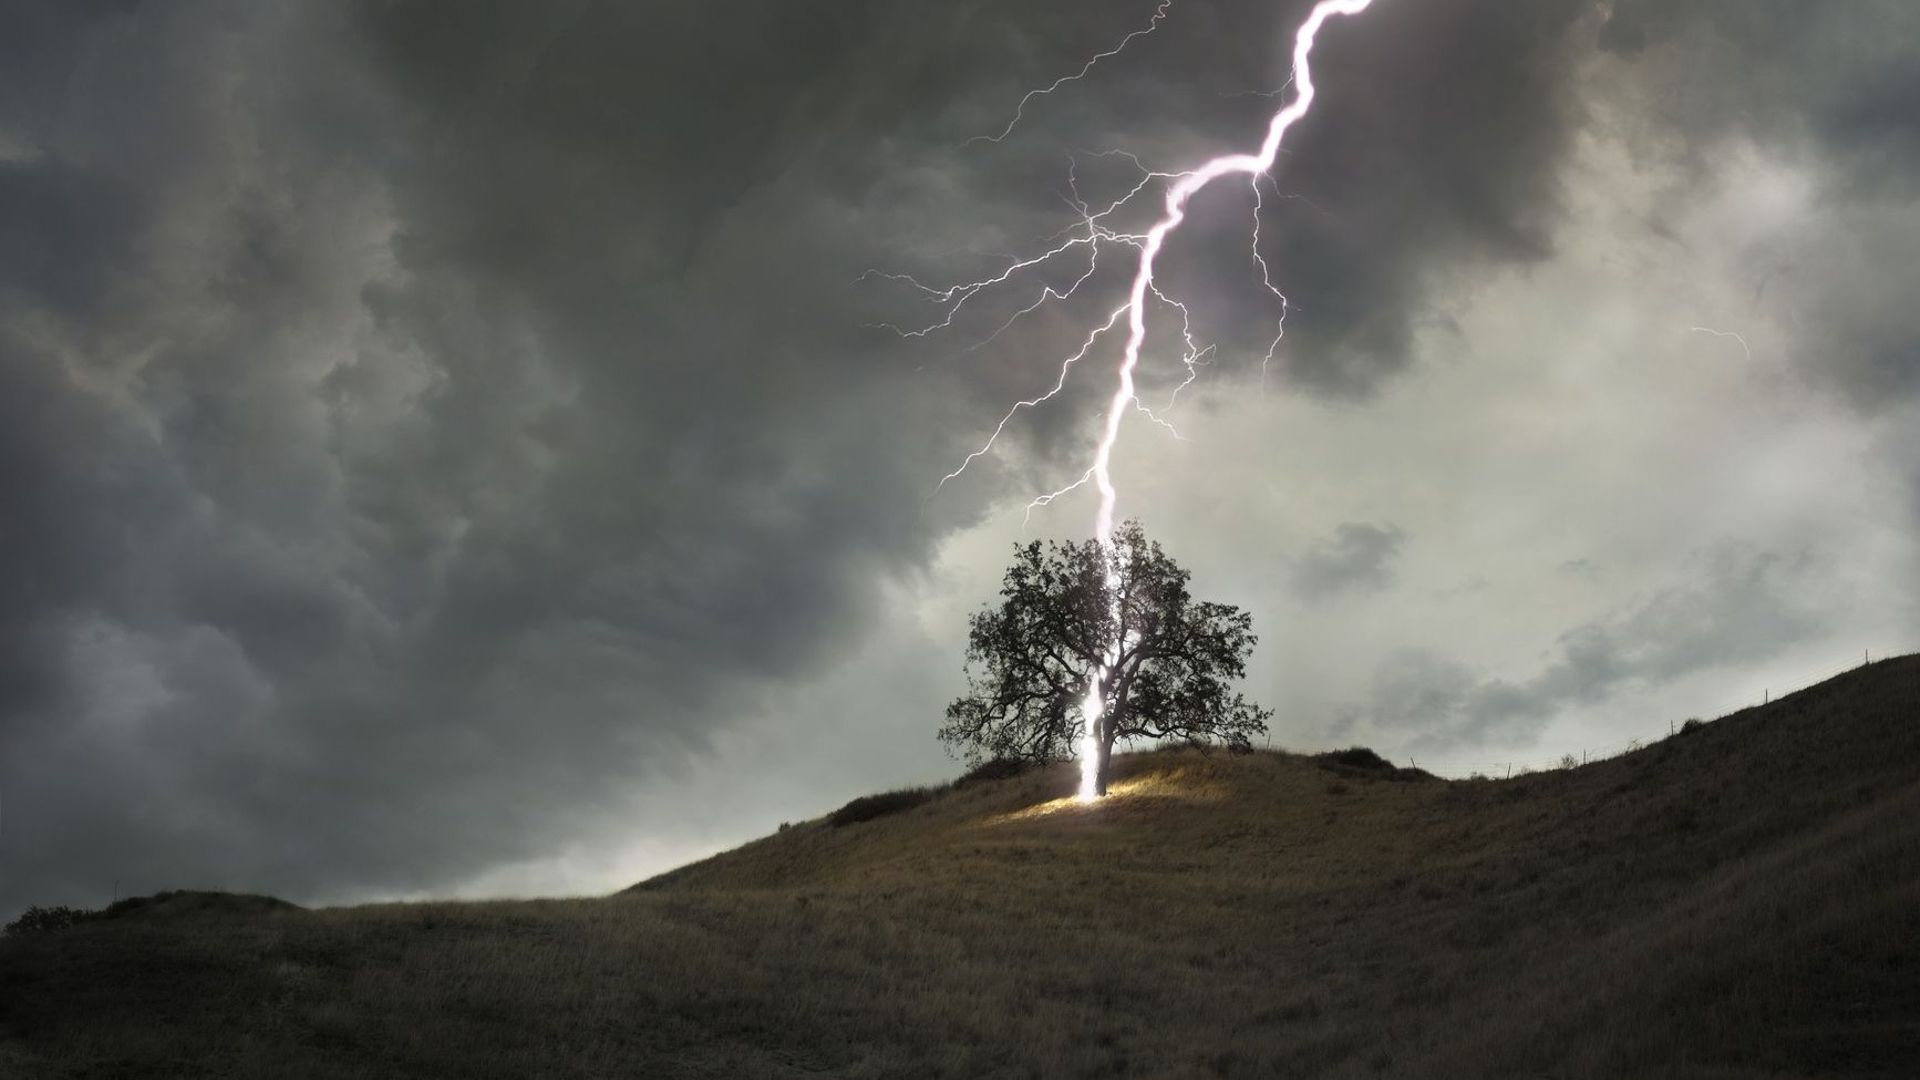 Lightning striking a lone tree during stormy weather